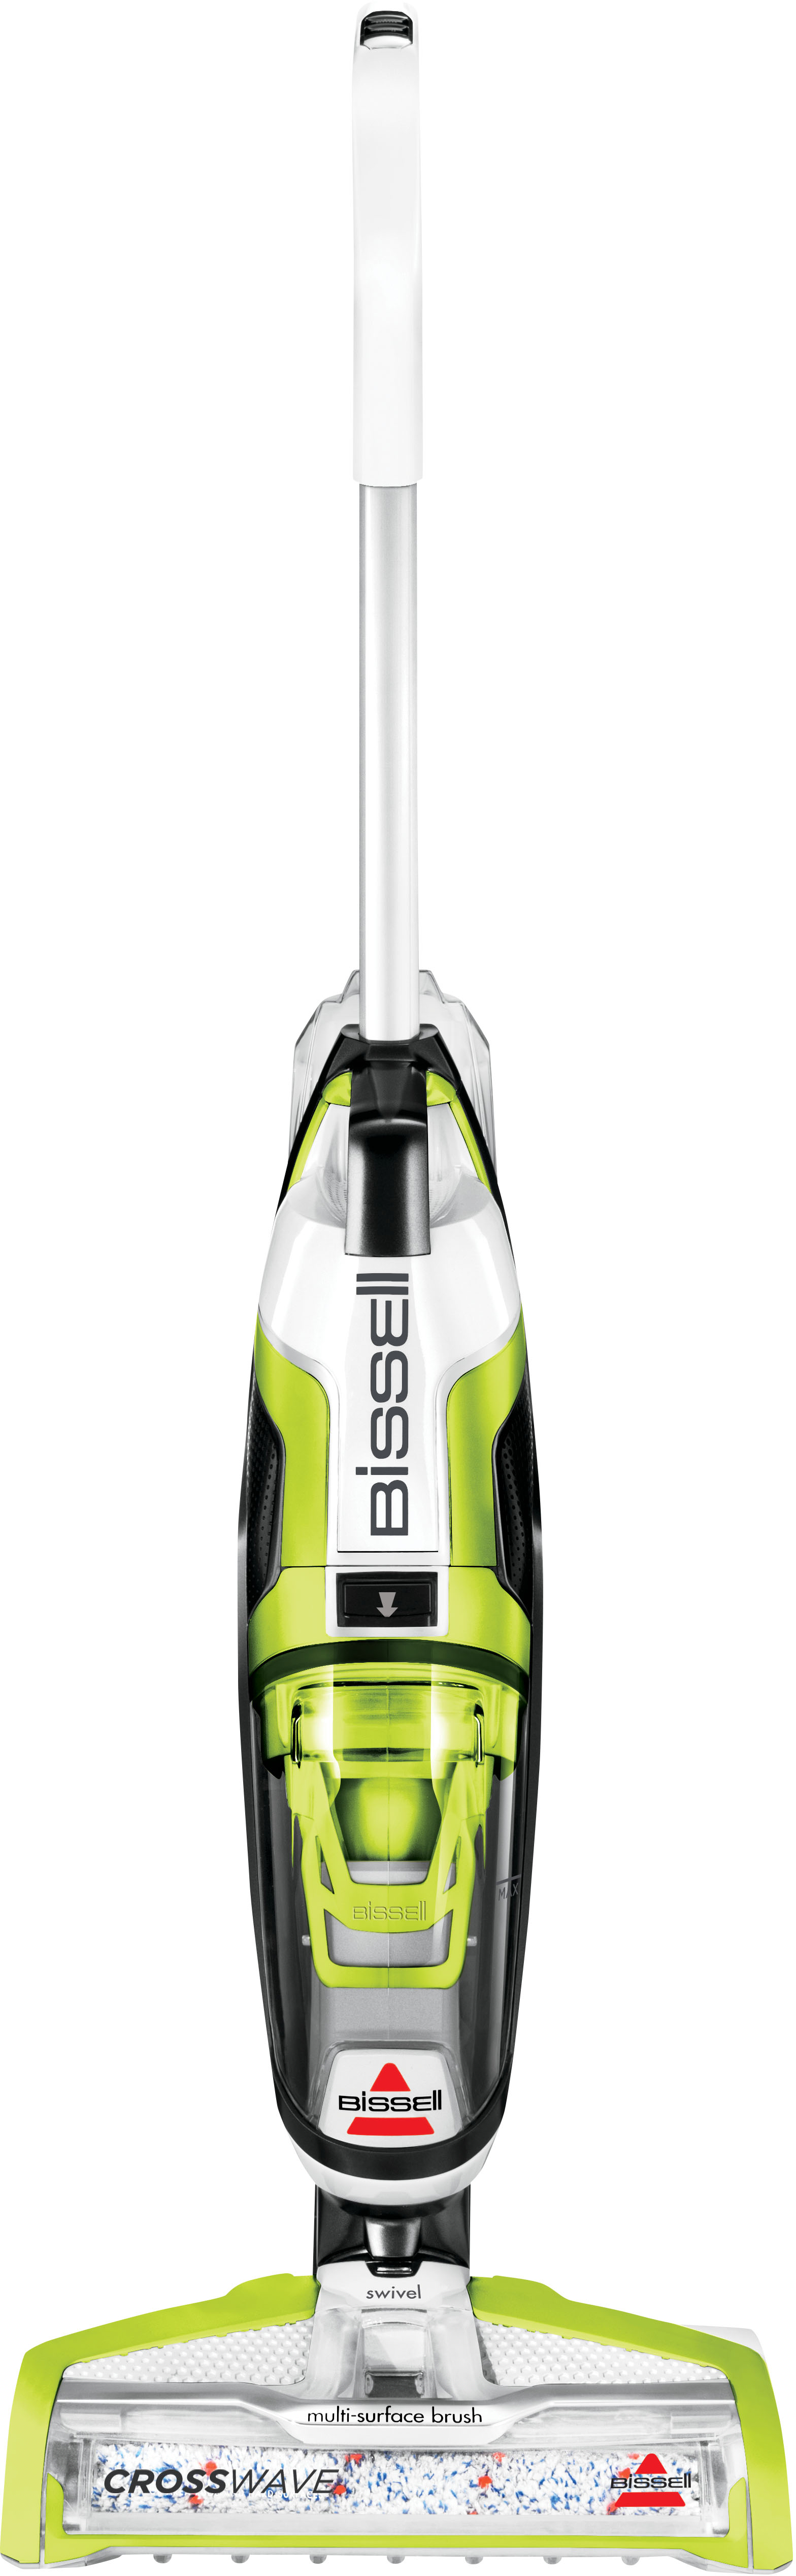 The Best Mop-Vacuum Combo Is the Bissell CrossWave